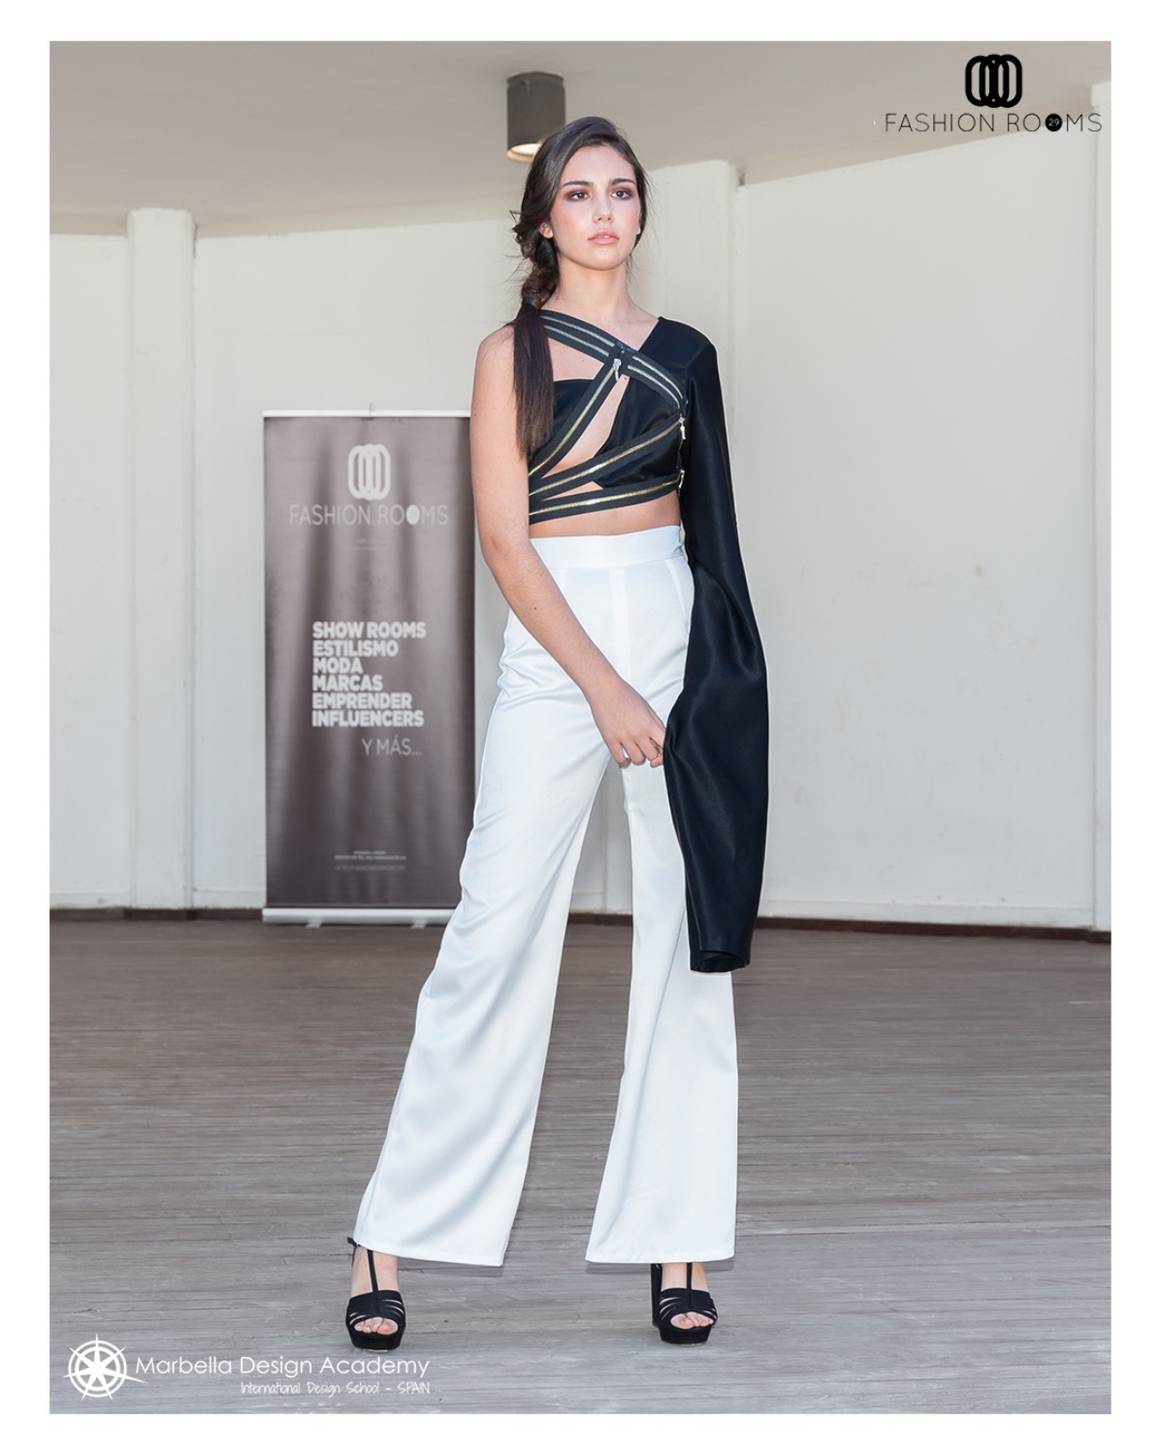 In Pictures: Marbella Design Academy at the Fashion Rooms 29